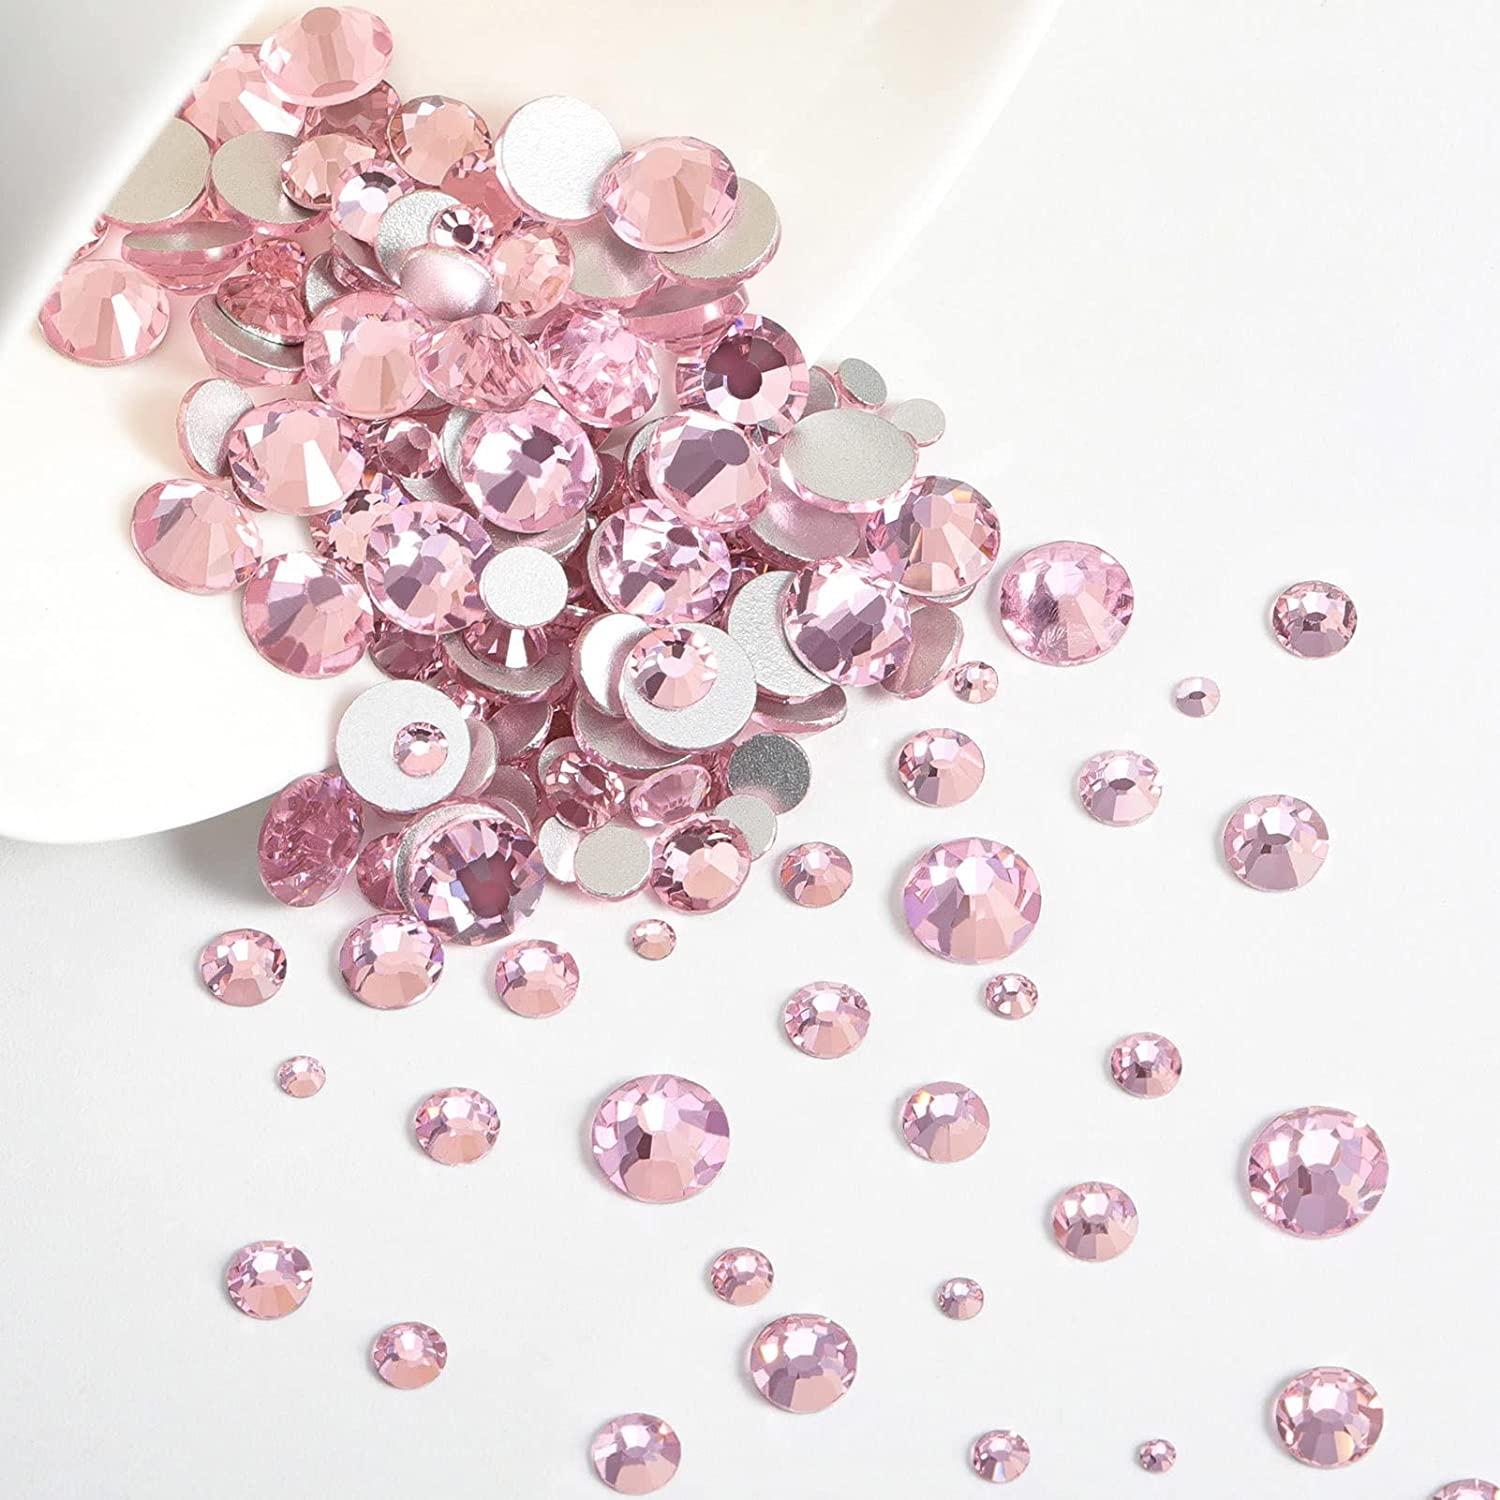 Beadsland 2500pcs Light Pink Rhinestones, Flatback Gems Round Crystal  Rhinestones for Crafts Mixed 8 Sizes SS4~SS30 with Picking Tweezer and Pen  (lt.pink)